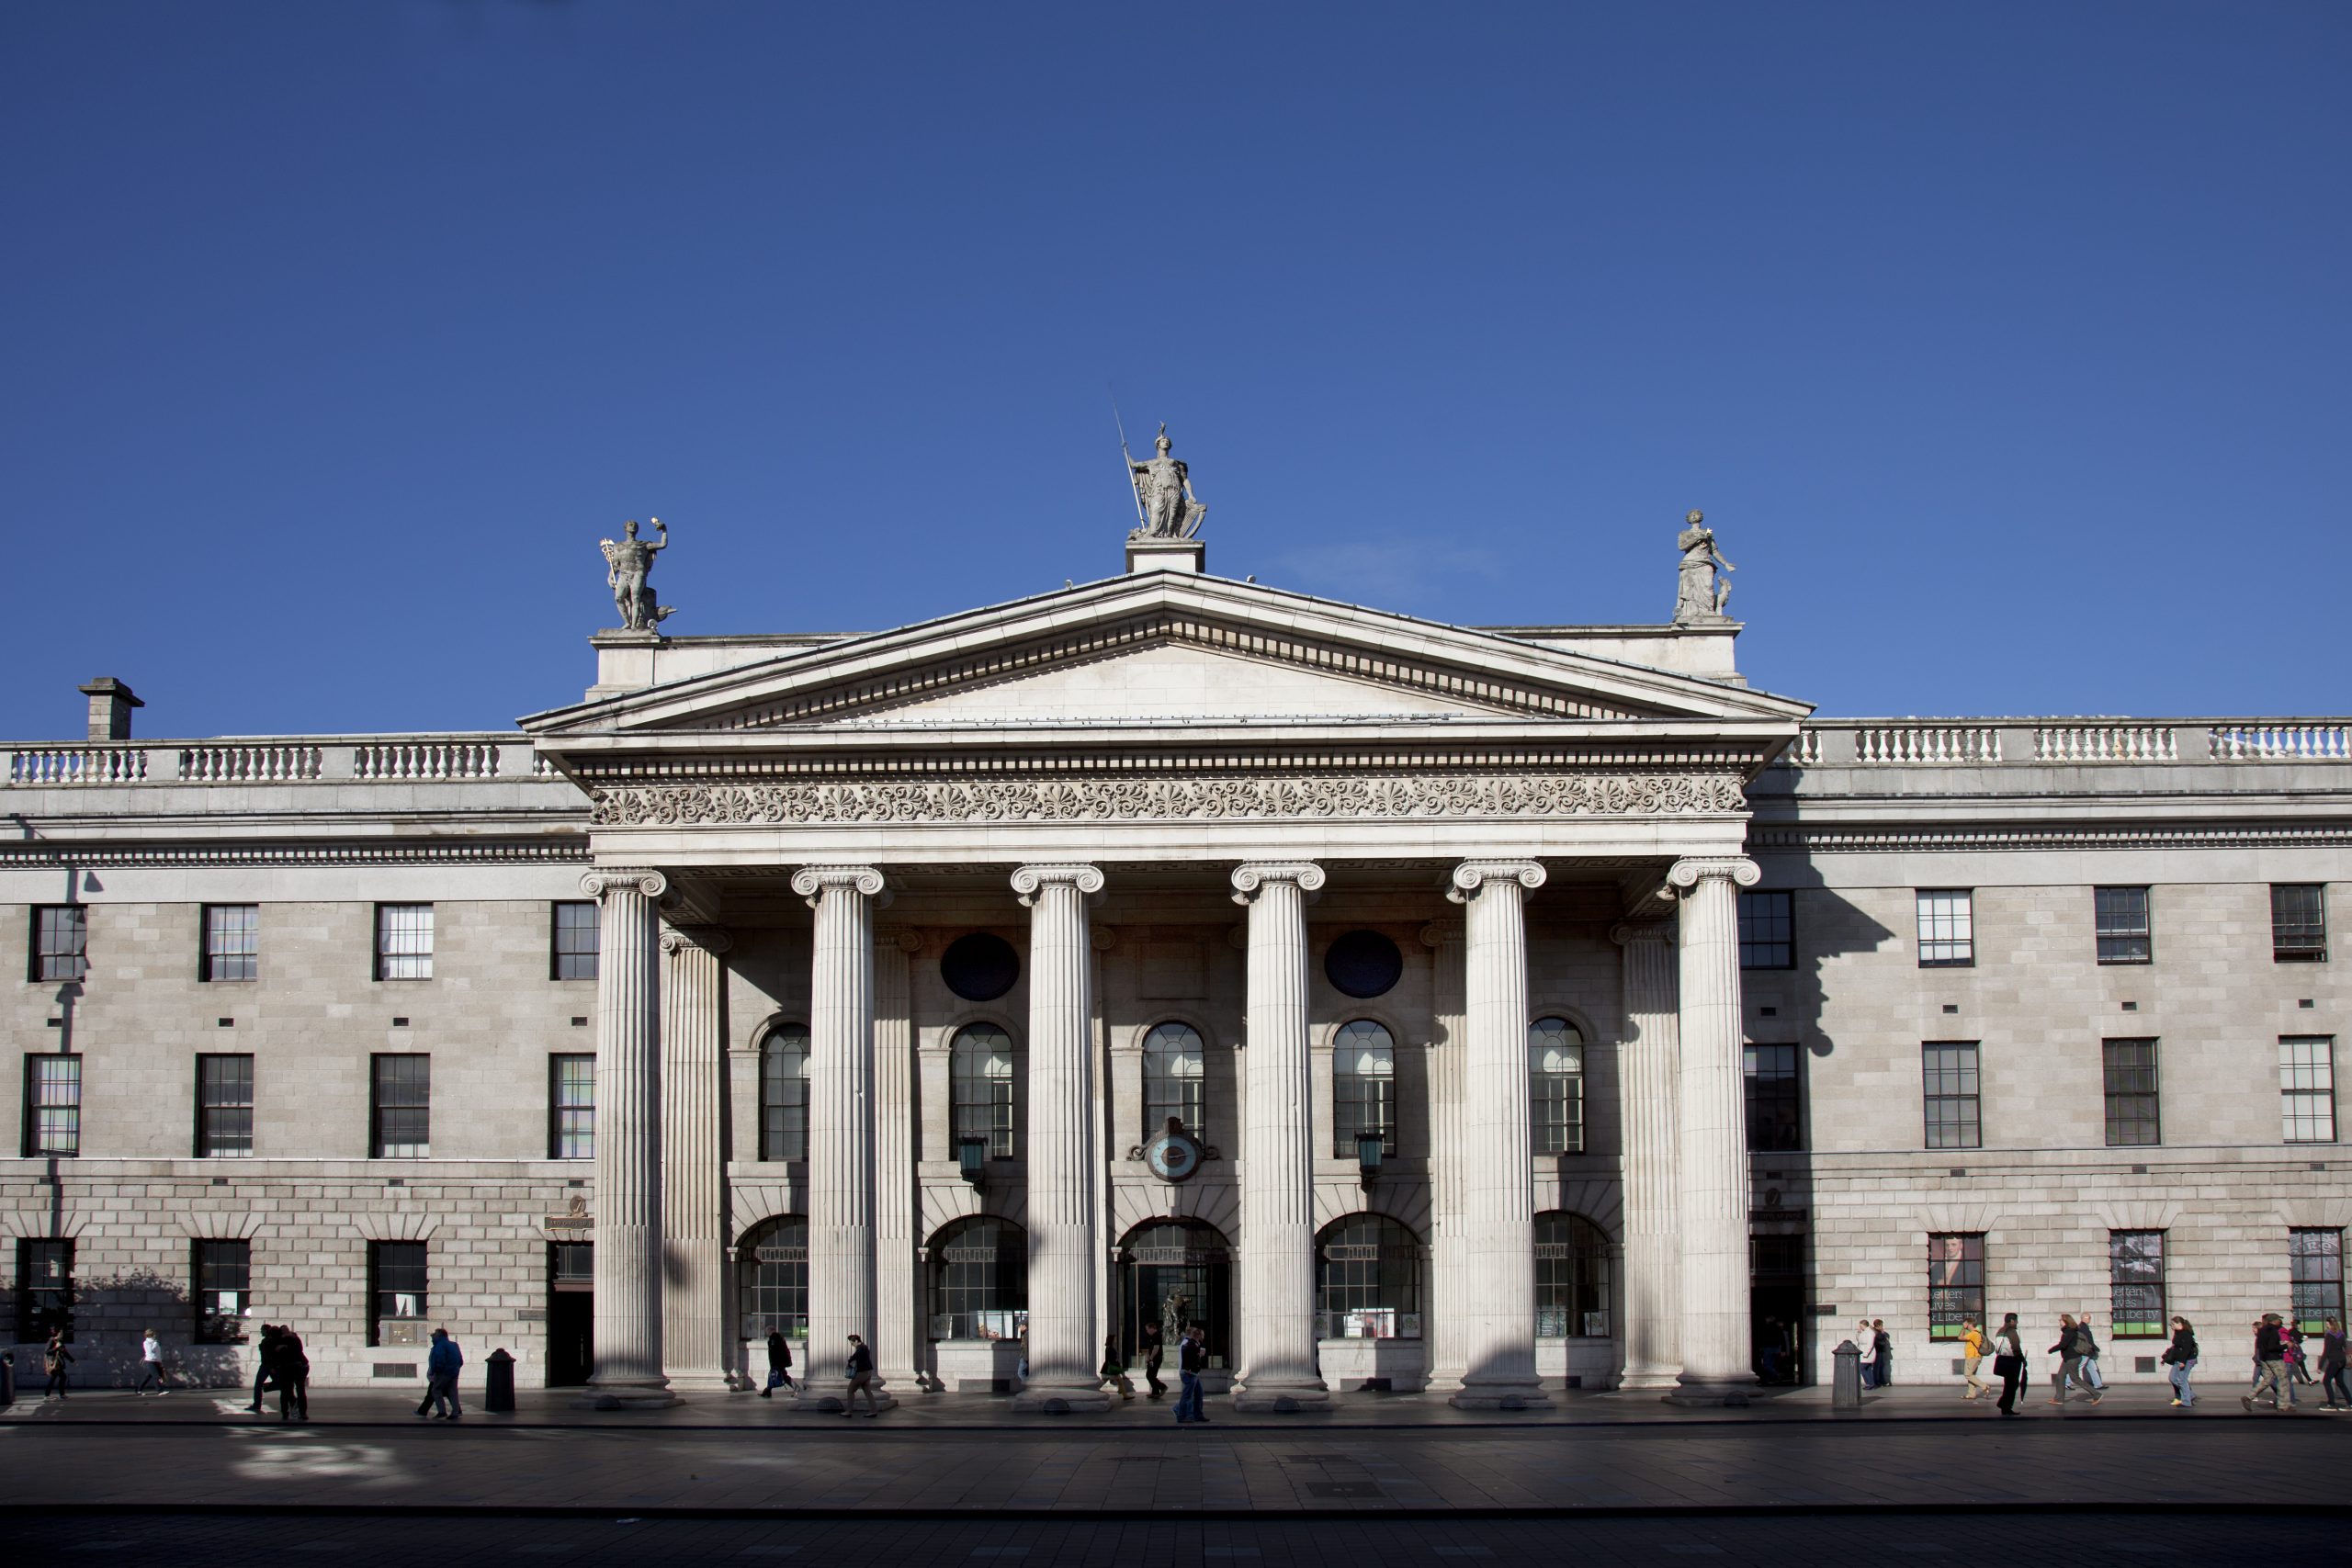 The GPO